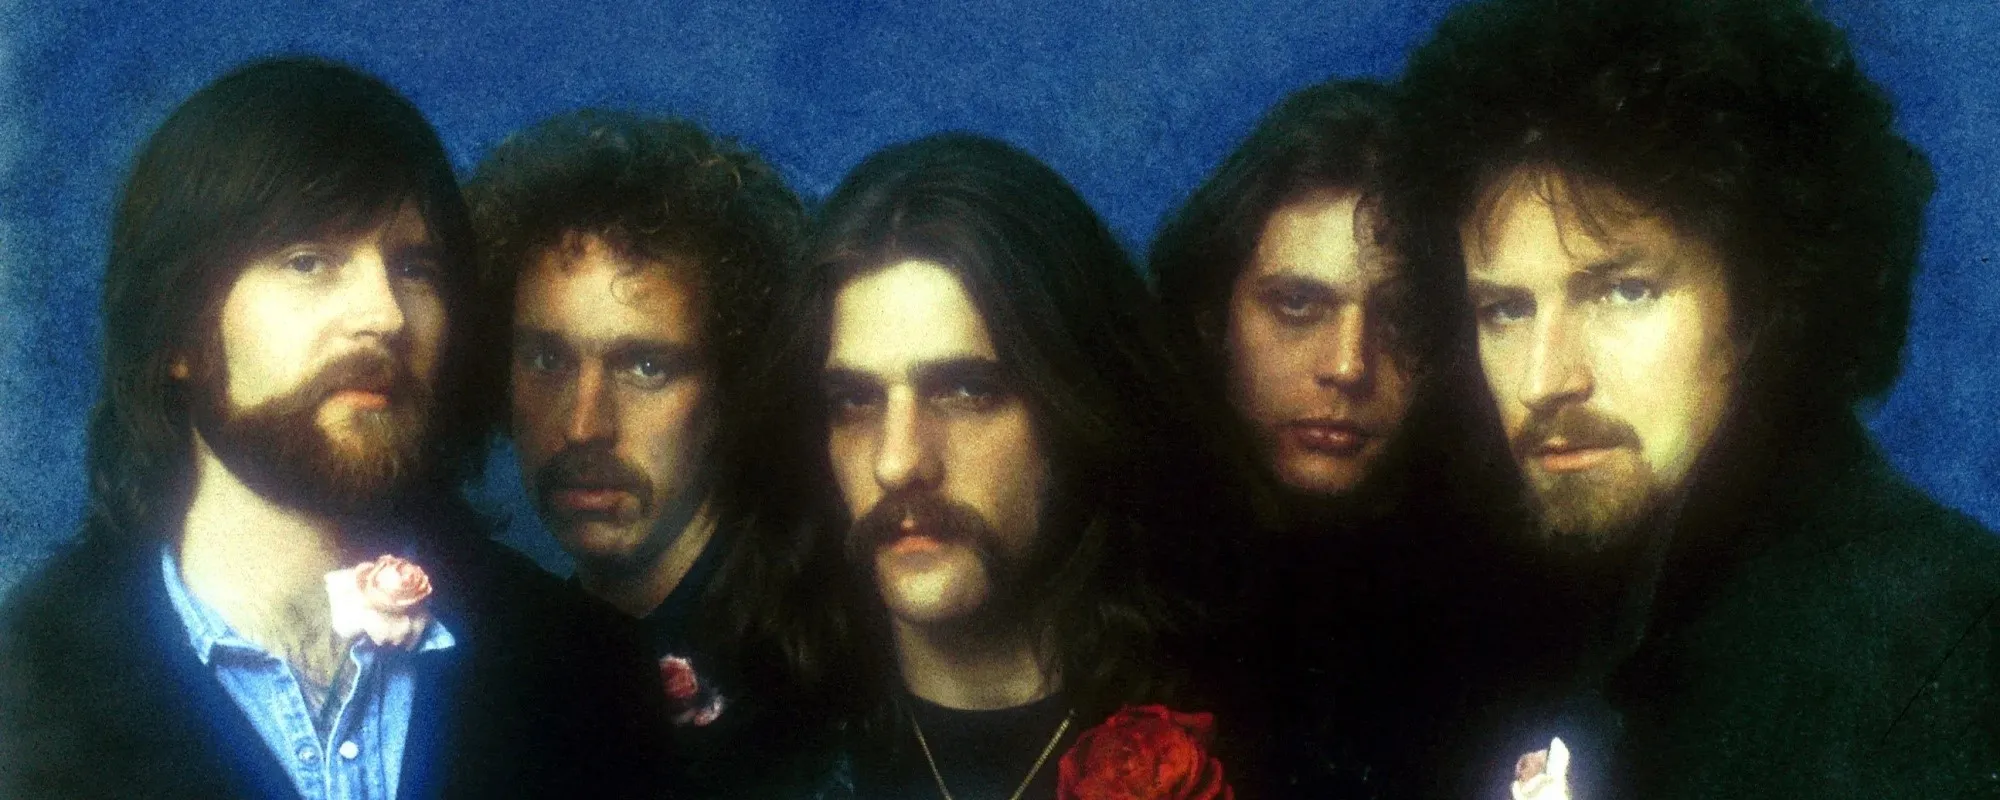 Best of Our Songs: The Eagles Releasing Career-Spanning ‘To the Limit’ Compilation